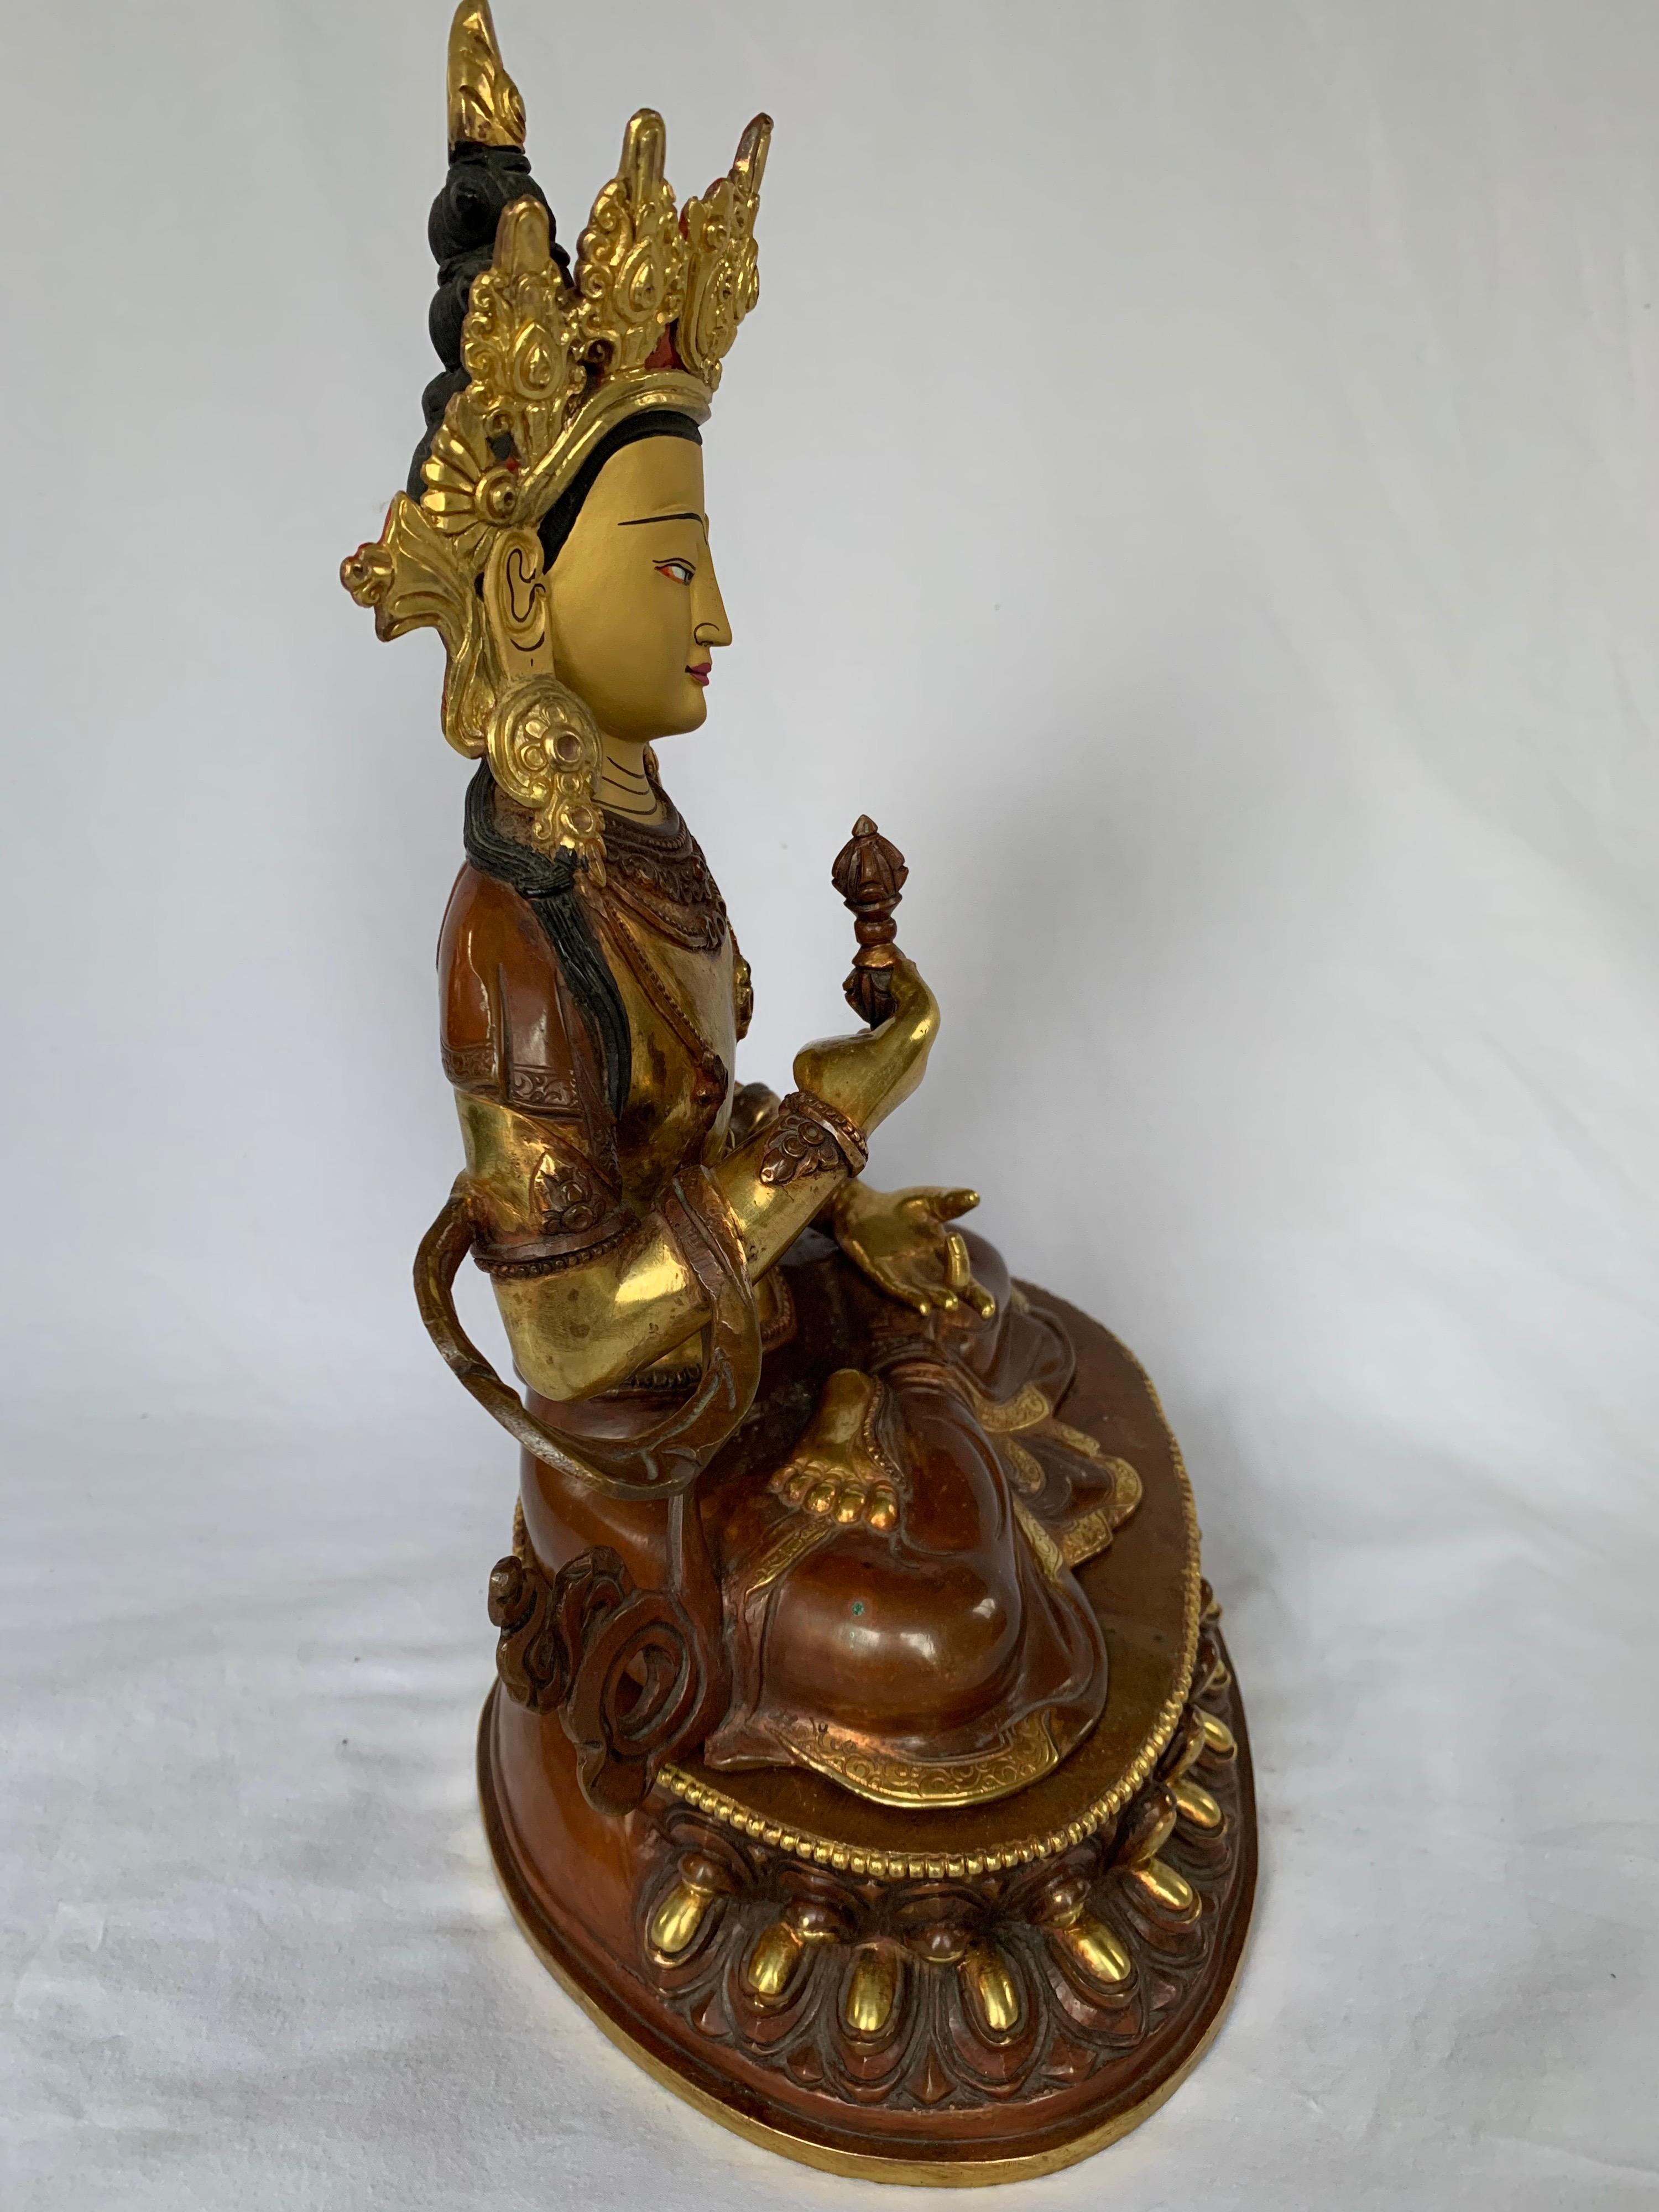 Vajrasattva Statue 12.5 Inch with 24K Gold Handcrafted by Lost Wax Process - Gray Figurative Sculpture by Unknown